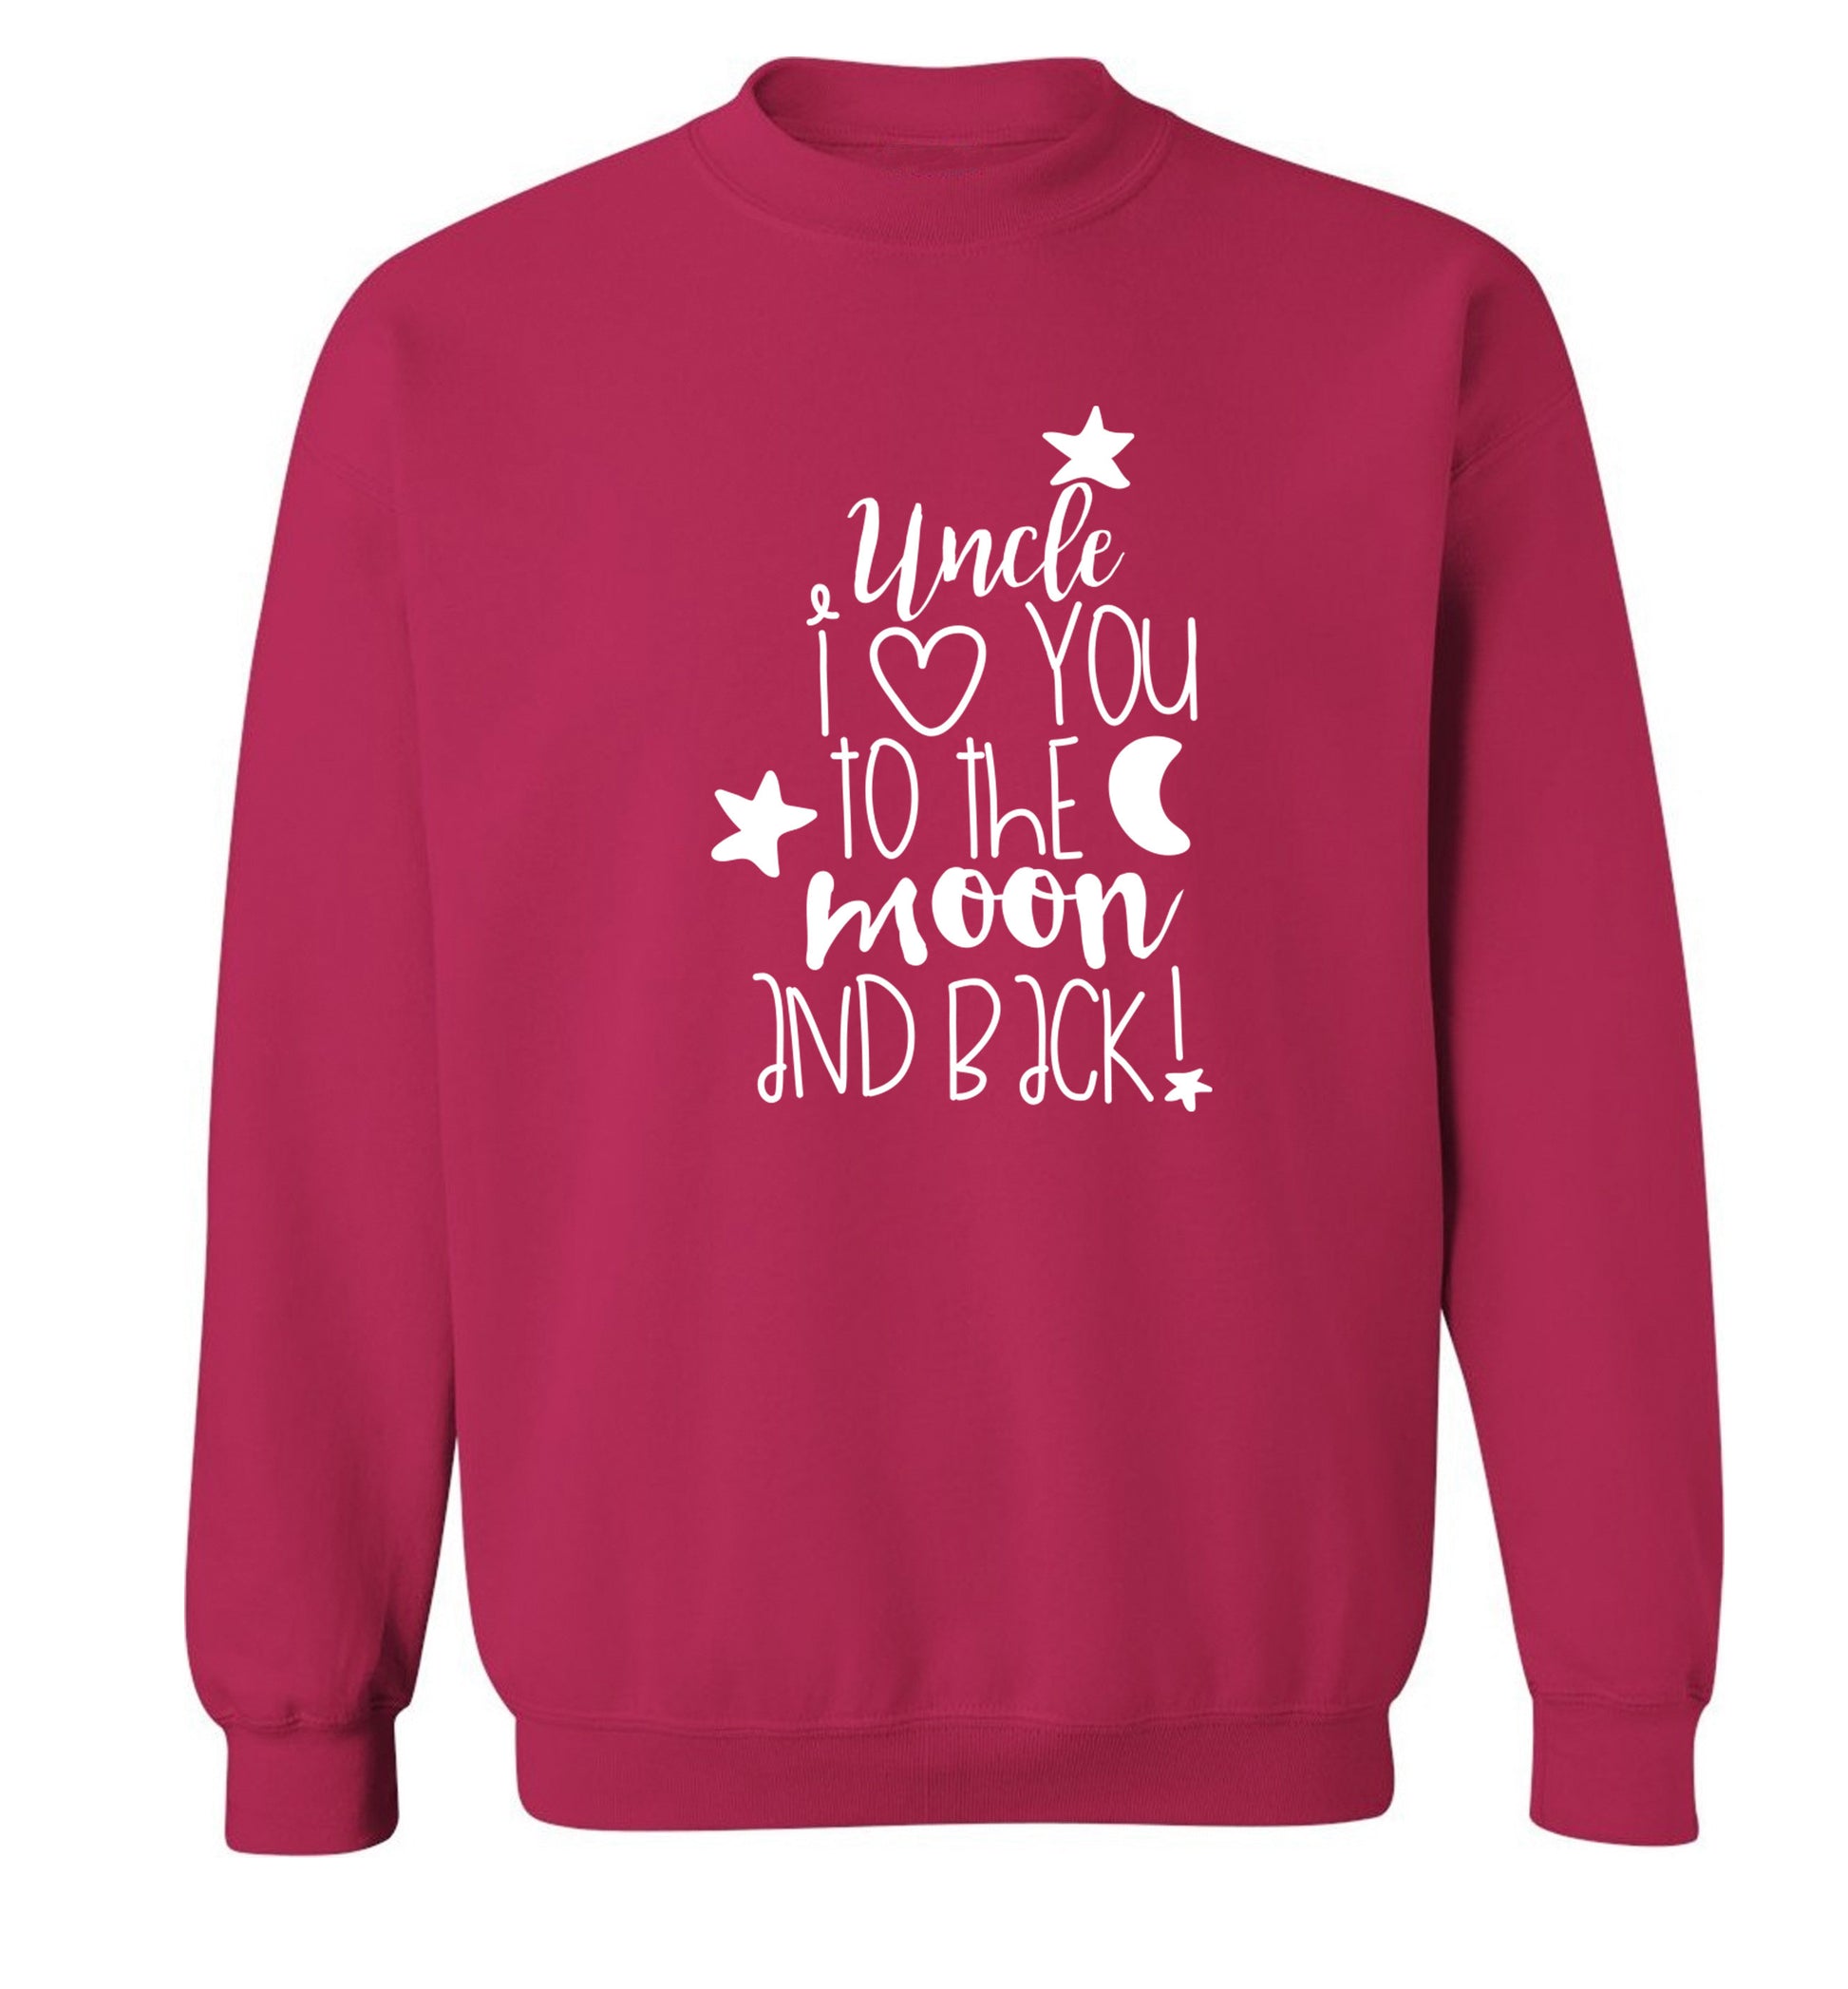 Uncle I love you to the moon and back Adult's unisex pink  sweater XL